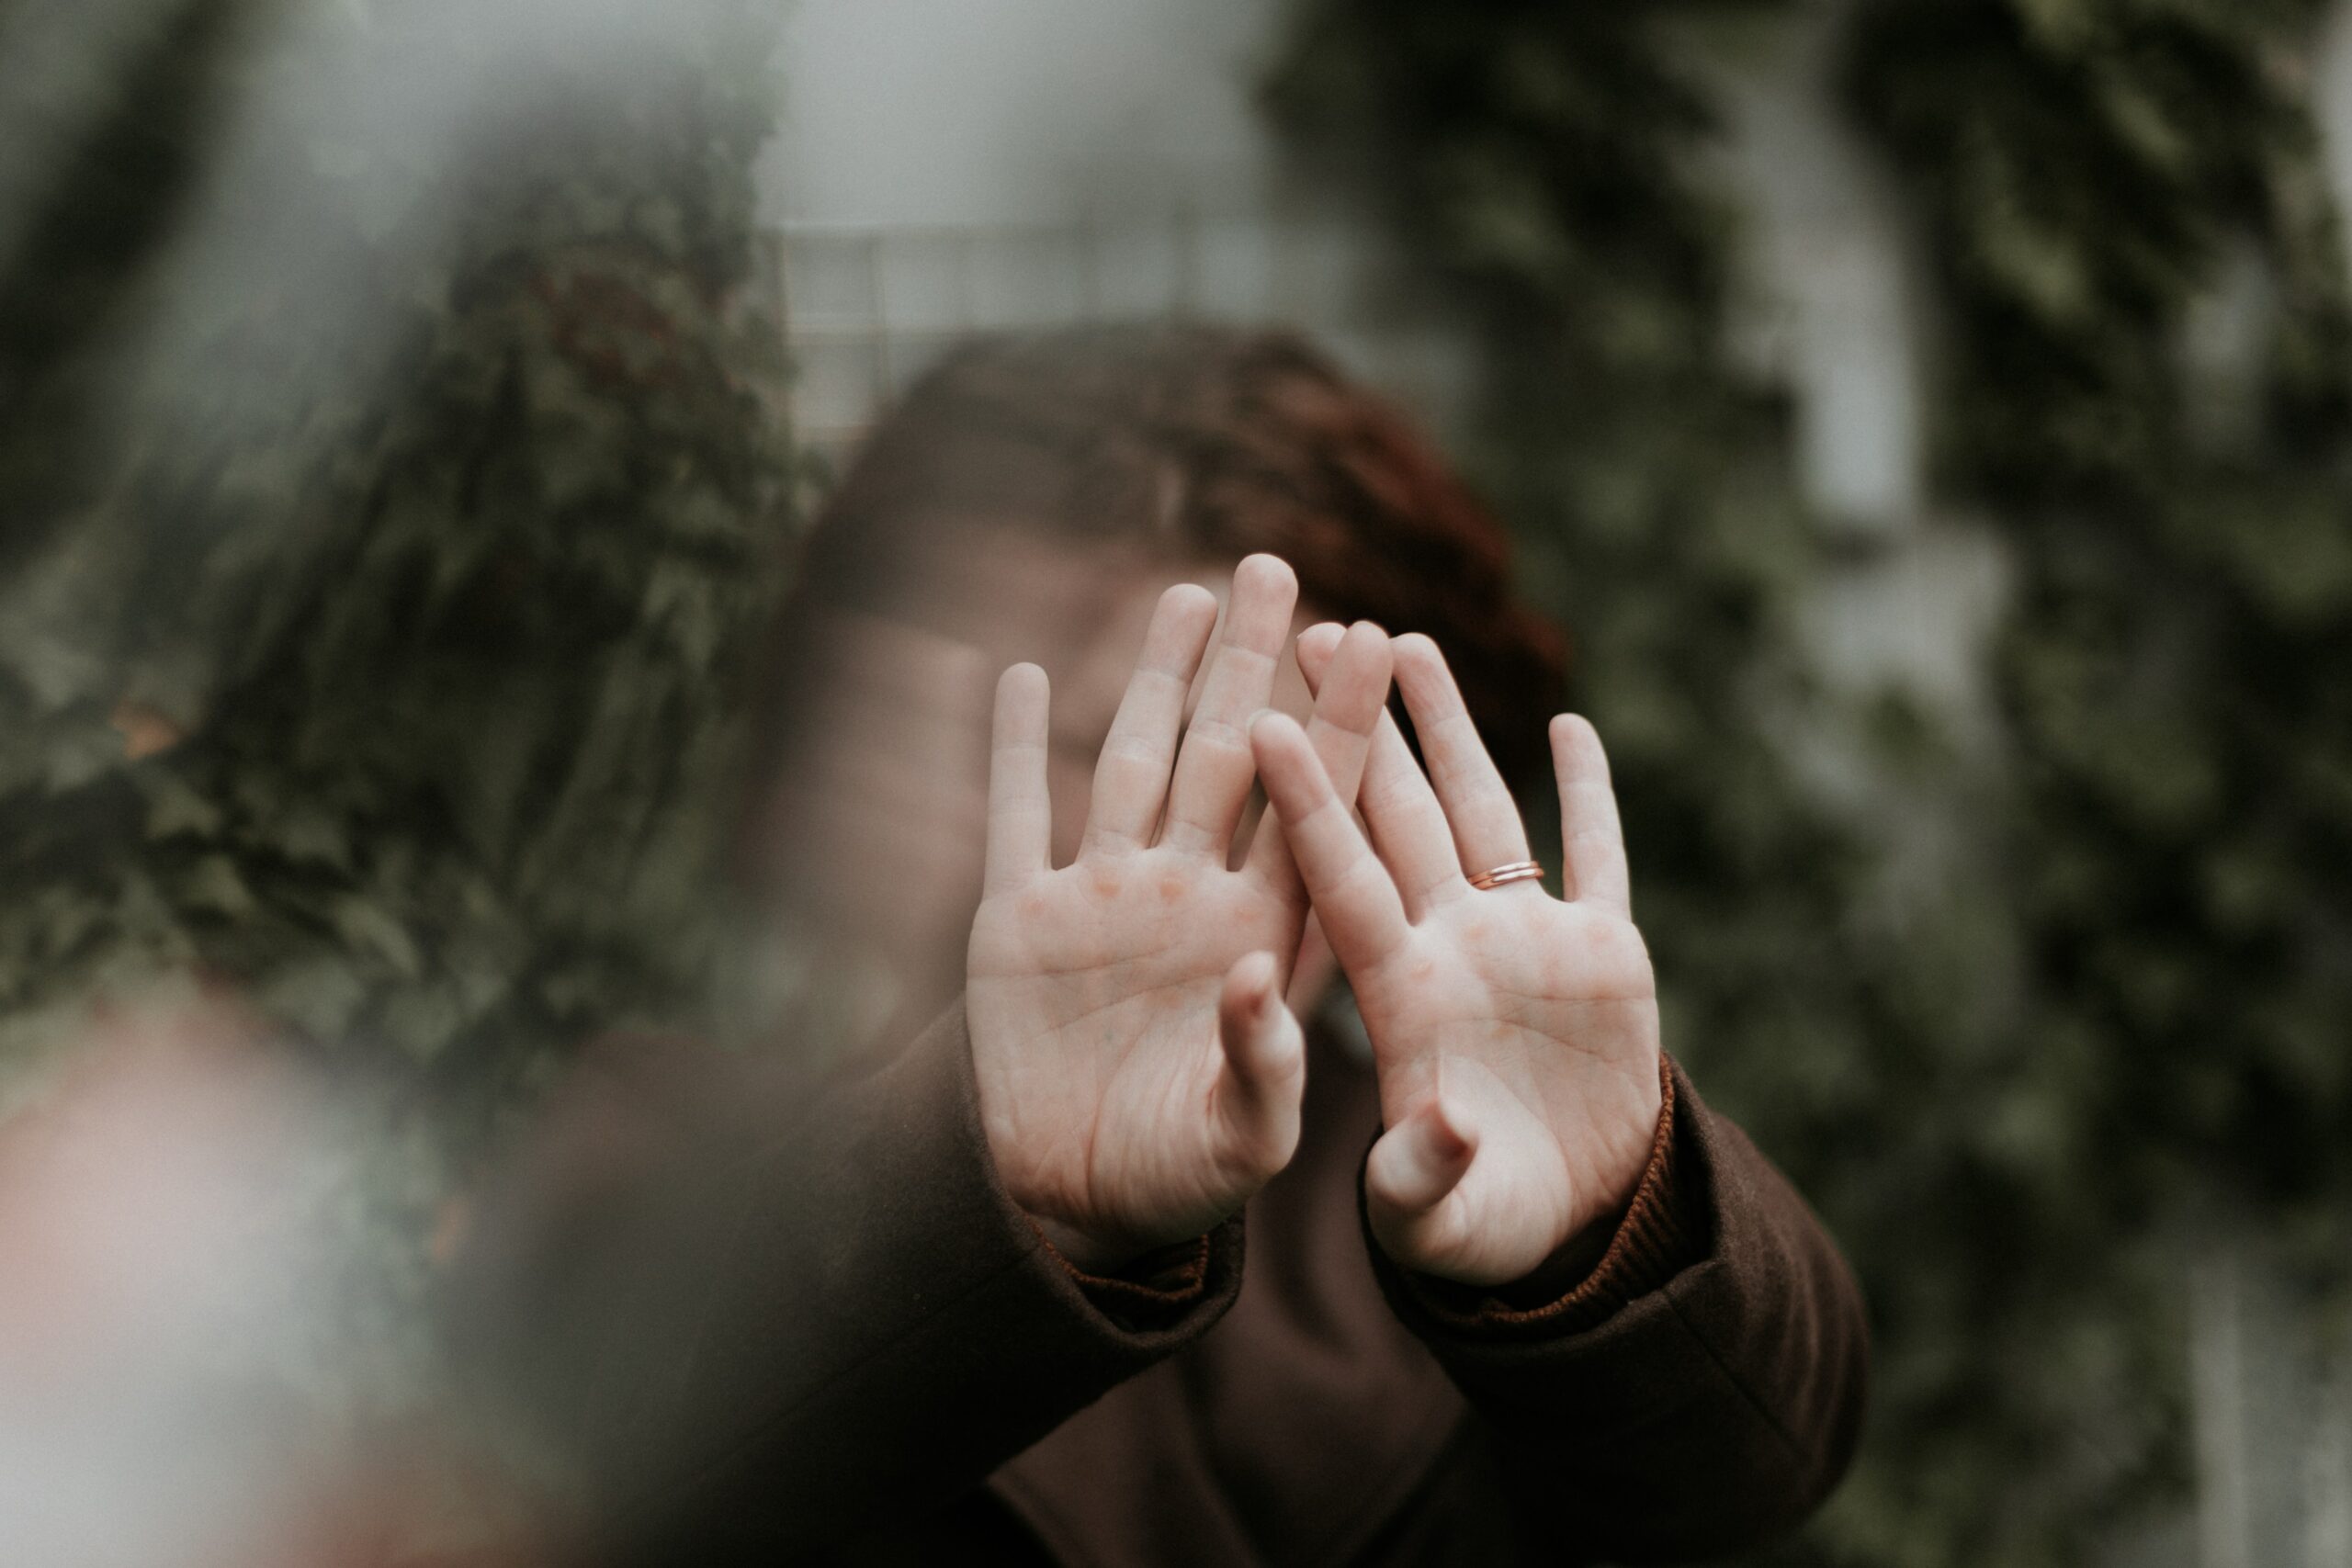 an image of a woman with a blurred face to represent xanax effects.